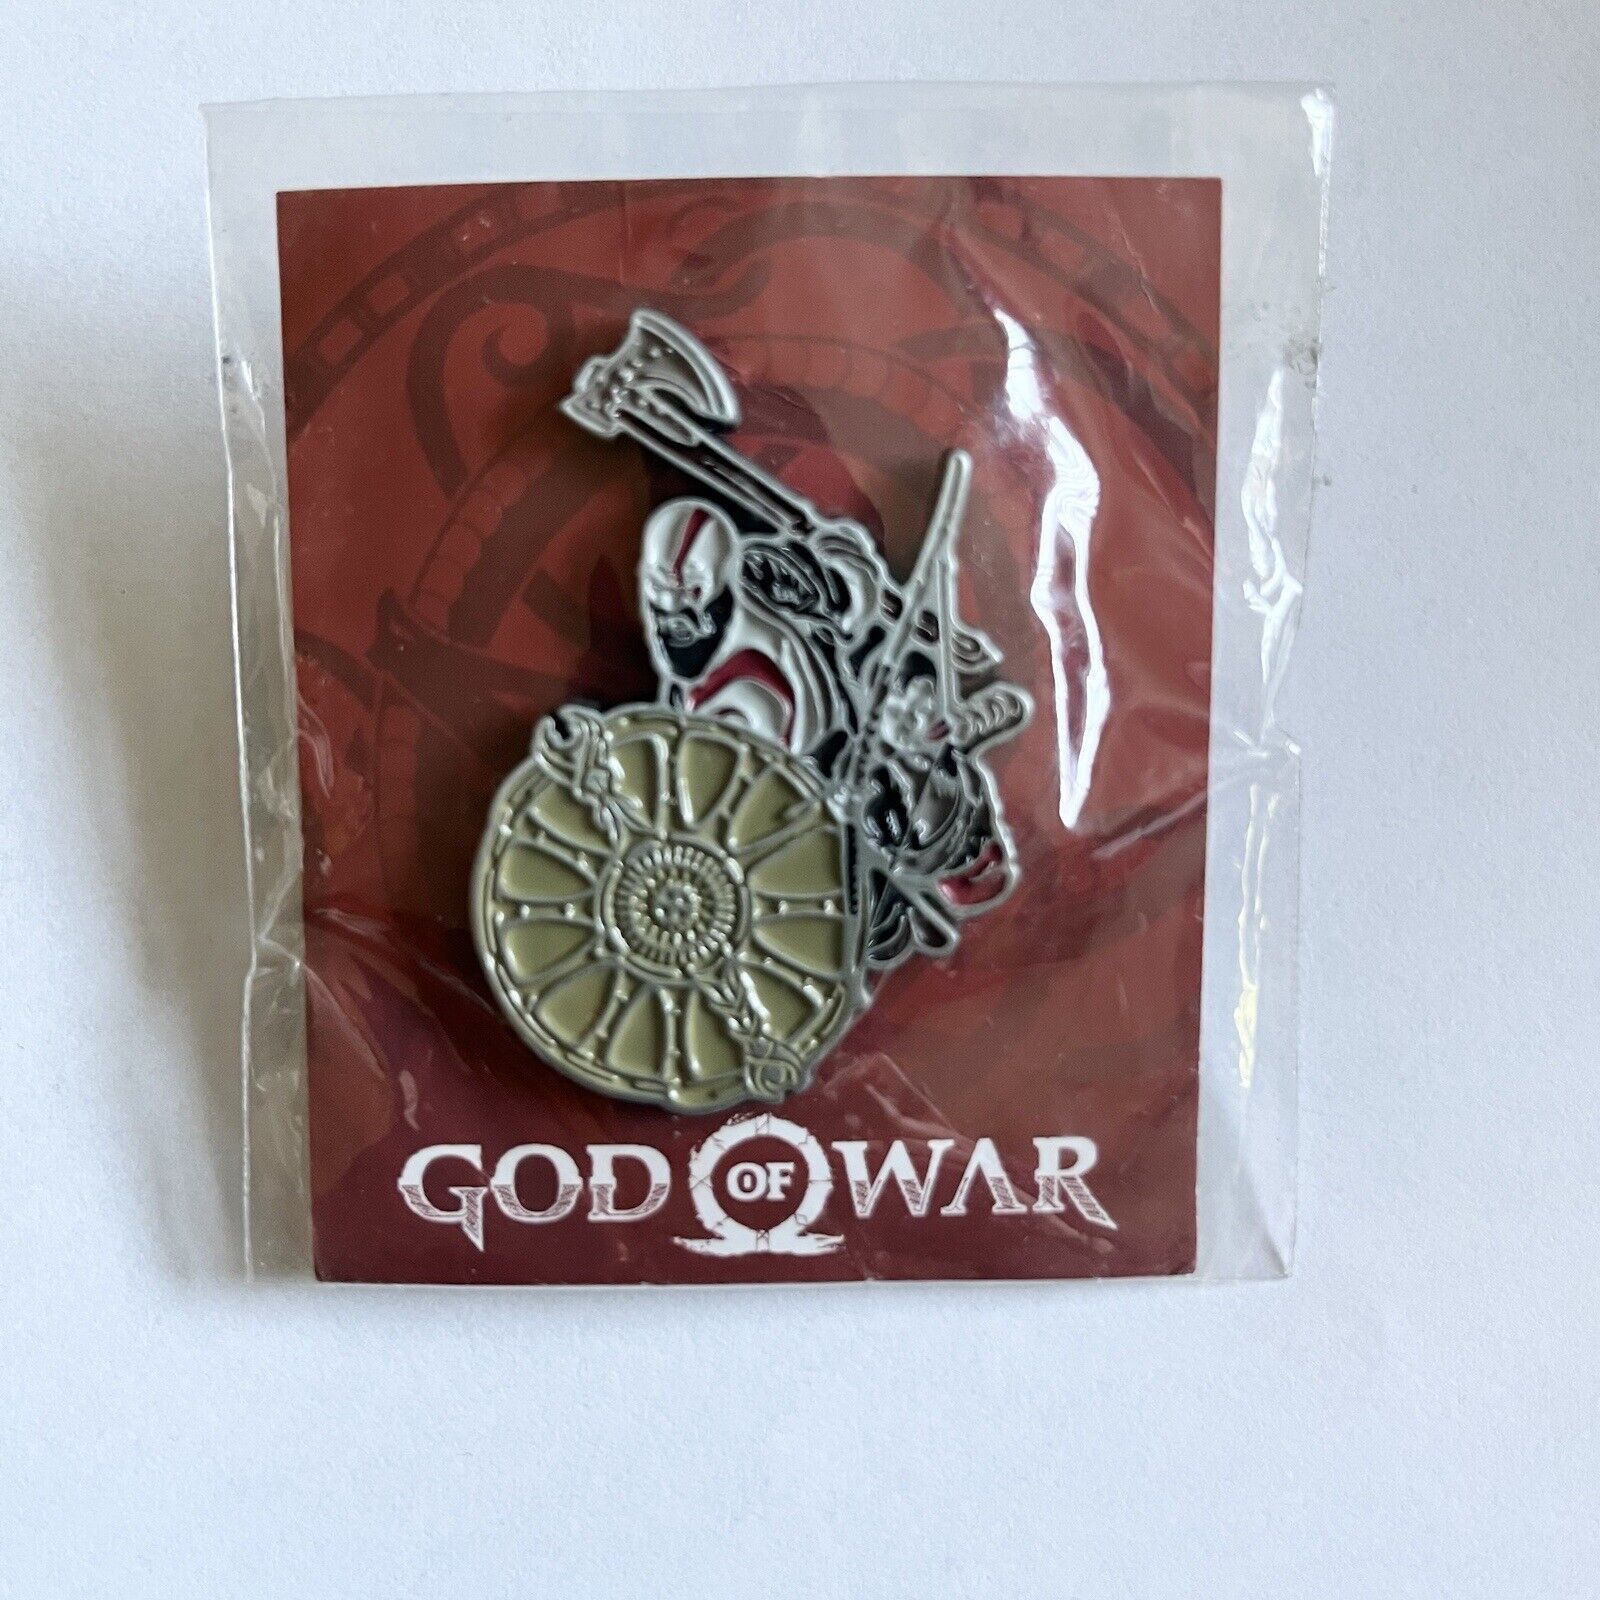 Rare God Of War Collectors Pin 2017 PlayStation Official Licensed Product SonyTM